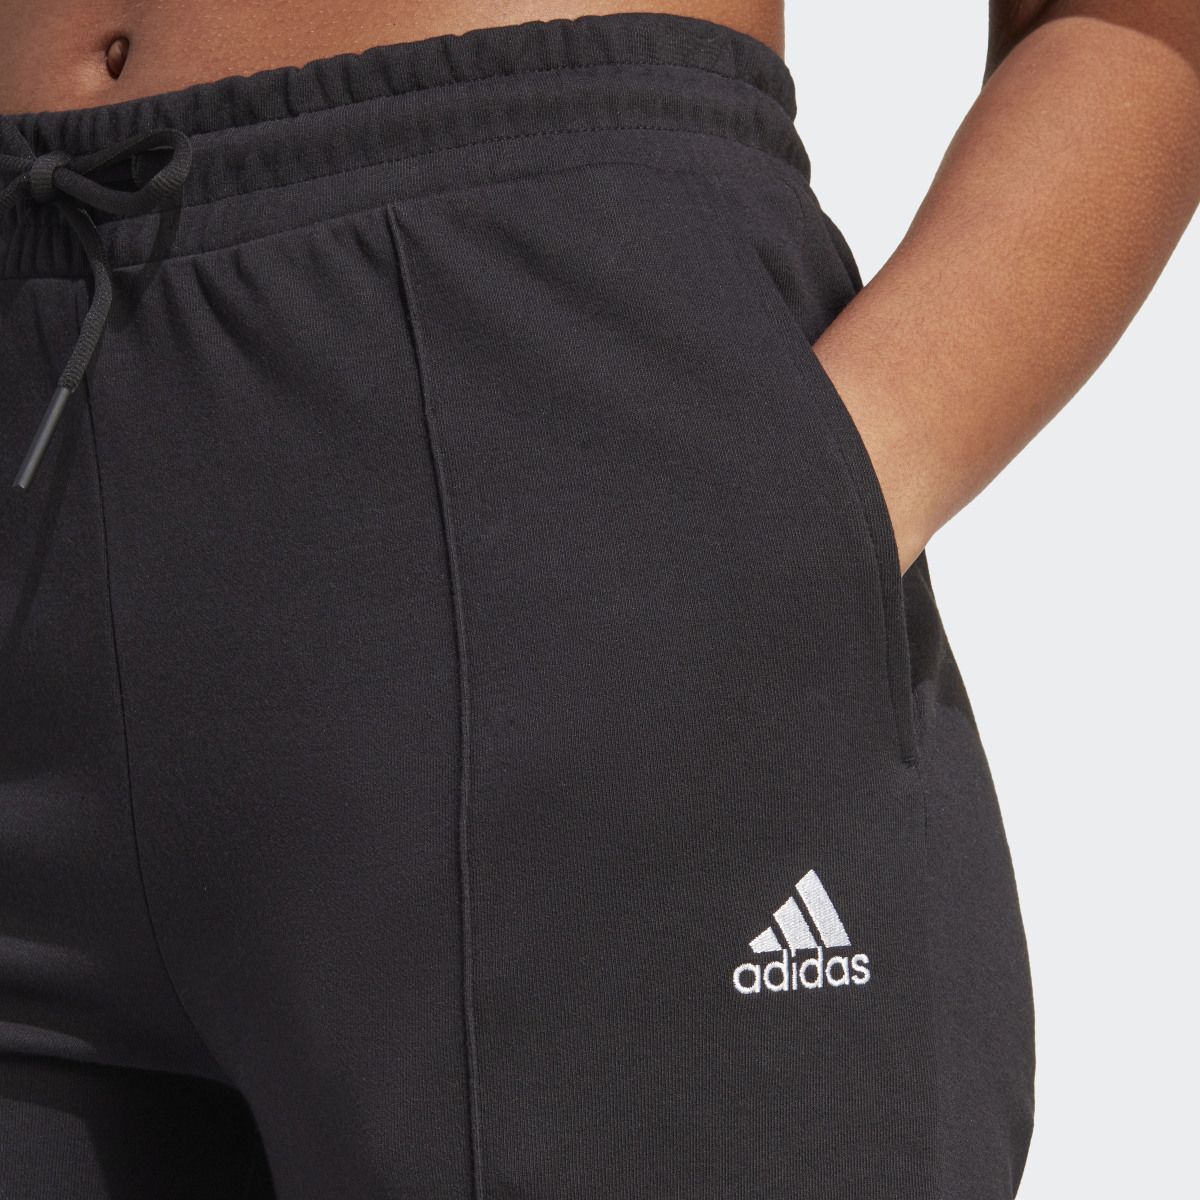 Adidas Allover adidas Graphic High-Rise Flare Pants. 5